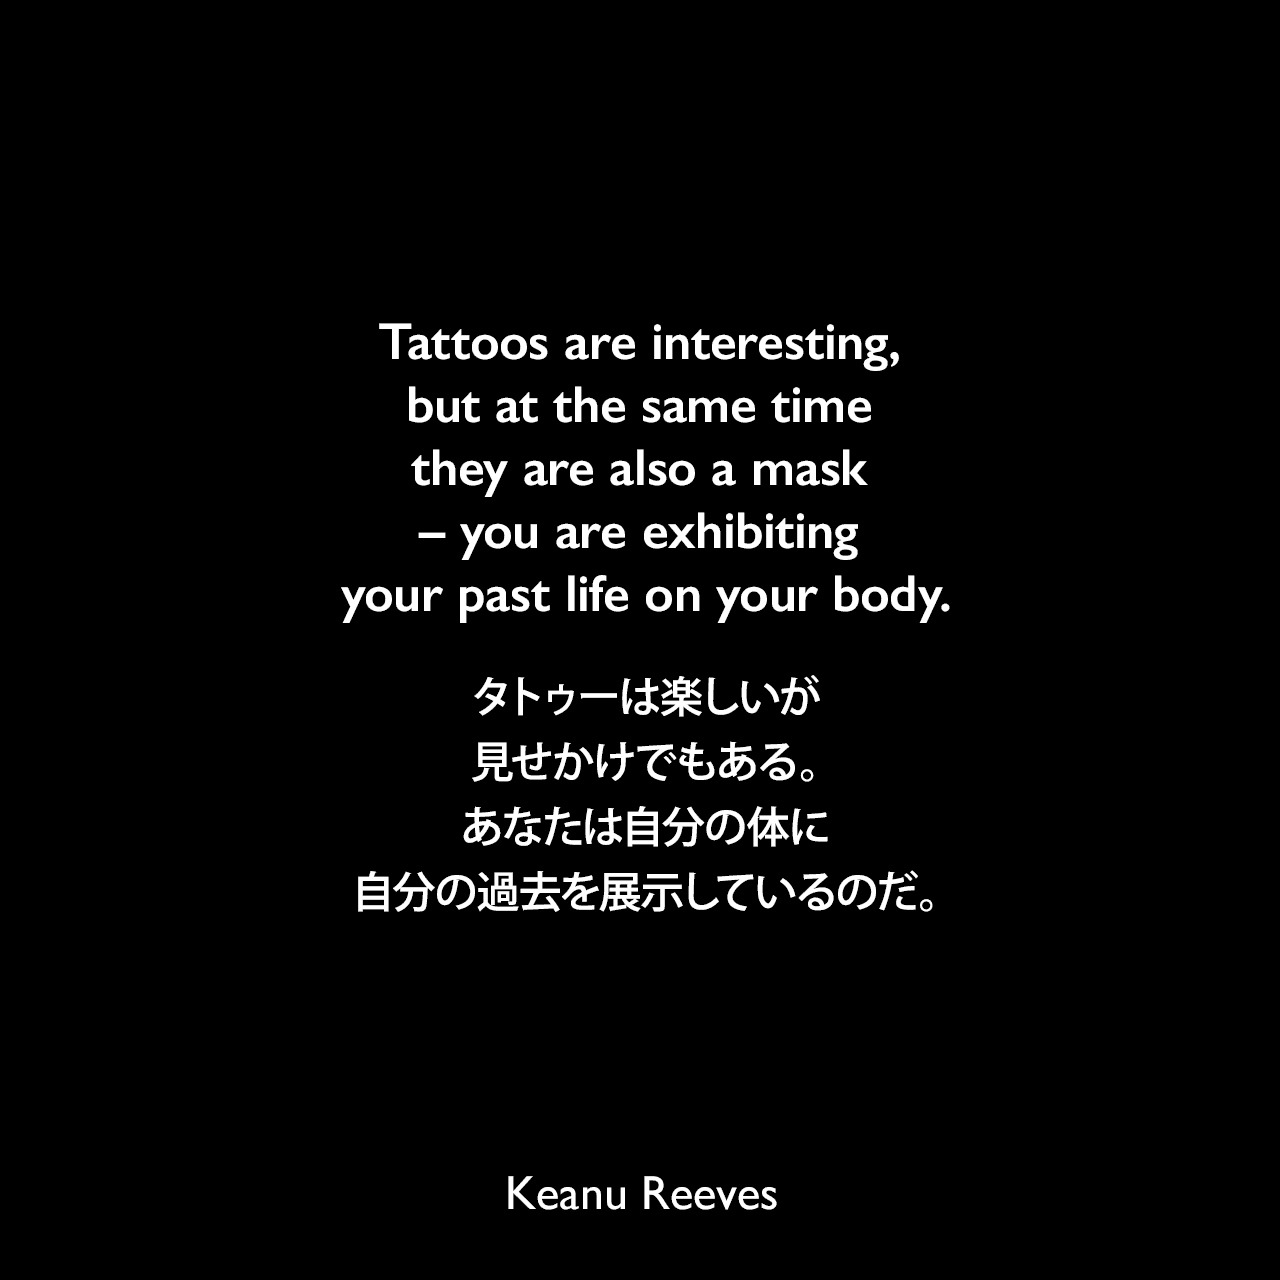 Tattoos are interesting, but at the same time they are also a mask – you are exhibiting your past life on your body.タトゥーは楽しいが、見せかけでもある。あなたは自分の体に自分の過去を展示しているのだ。Keanu Reeves